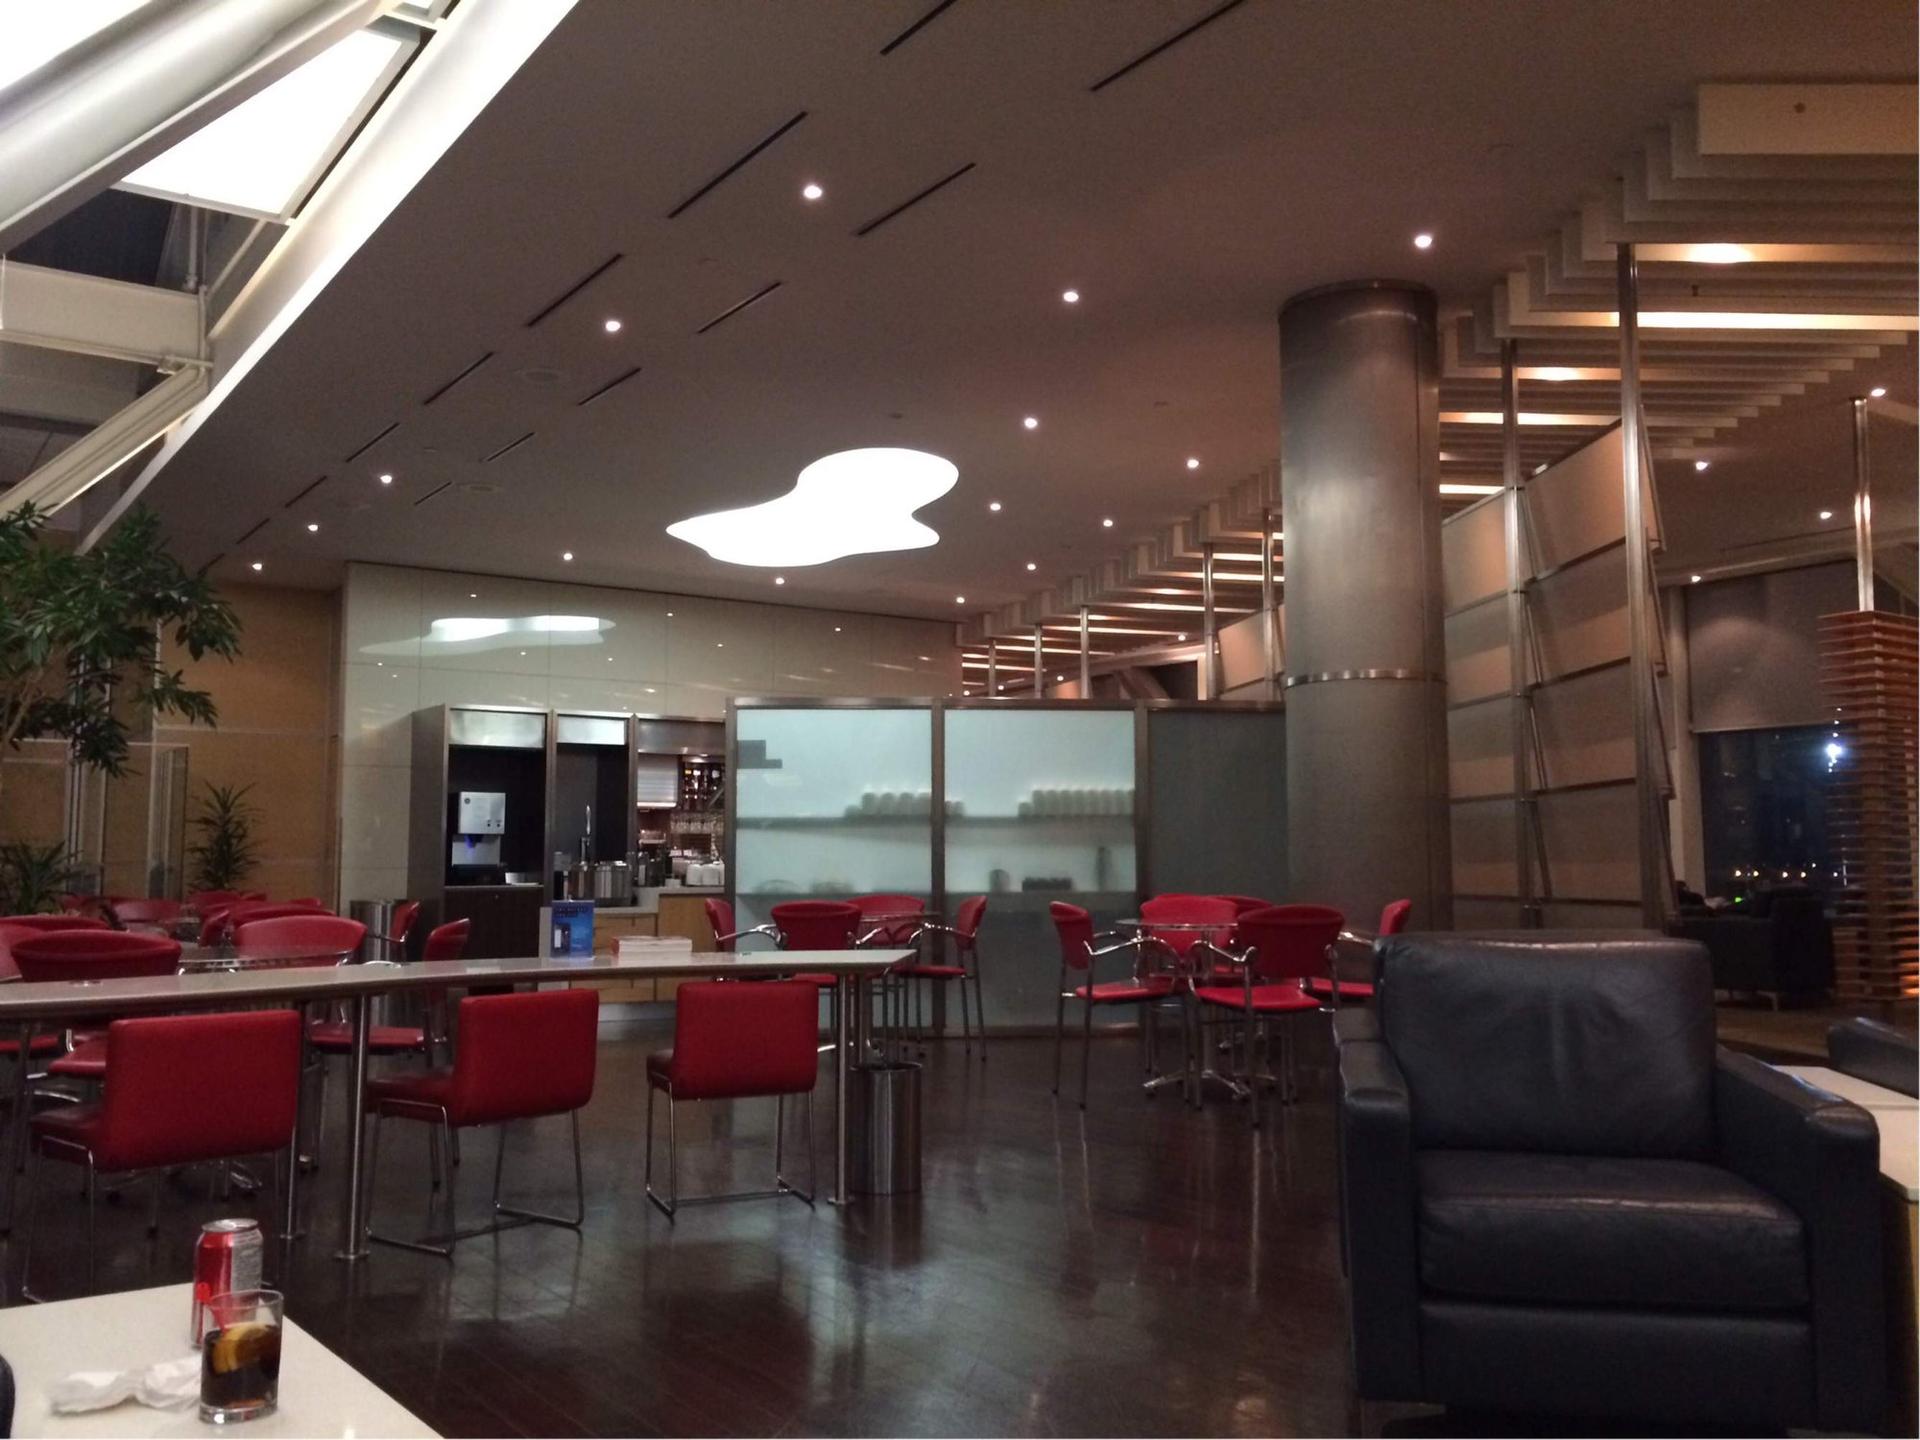 Air Canada Maple Leaf Lounge image 6 of 17